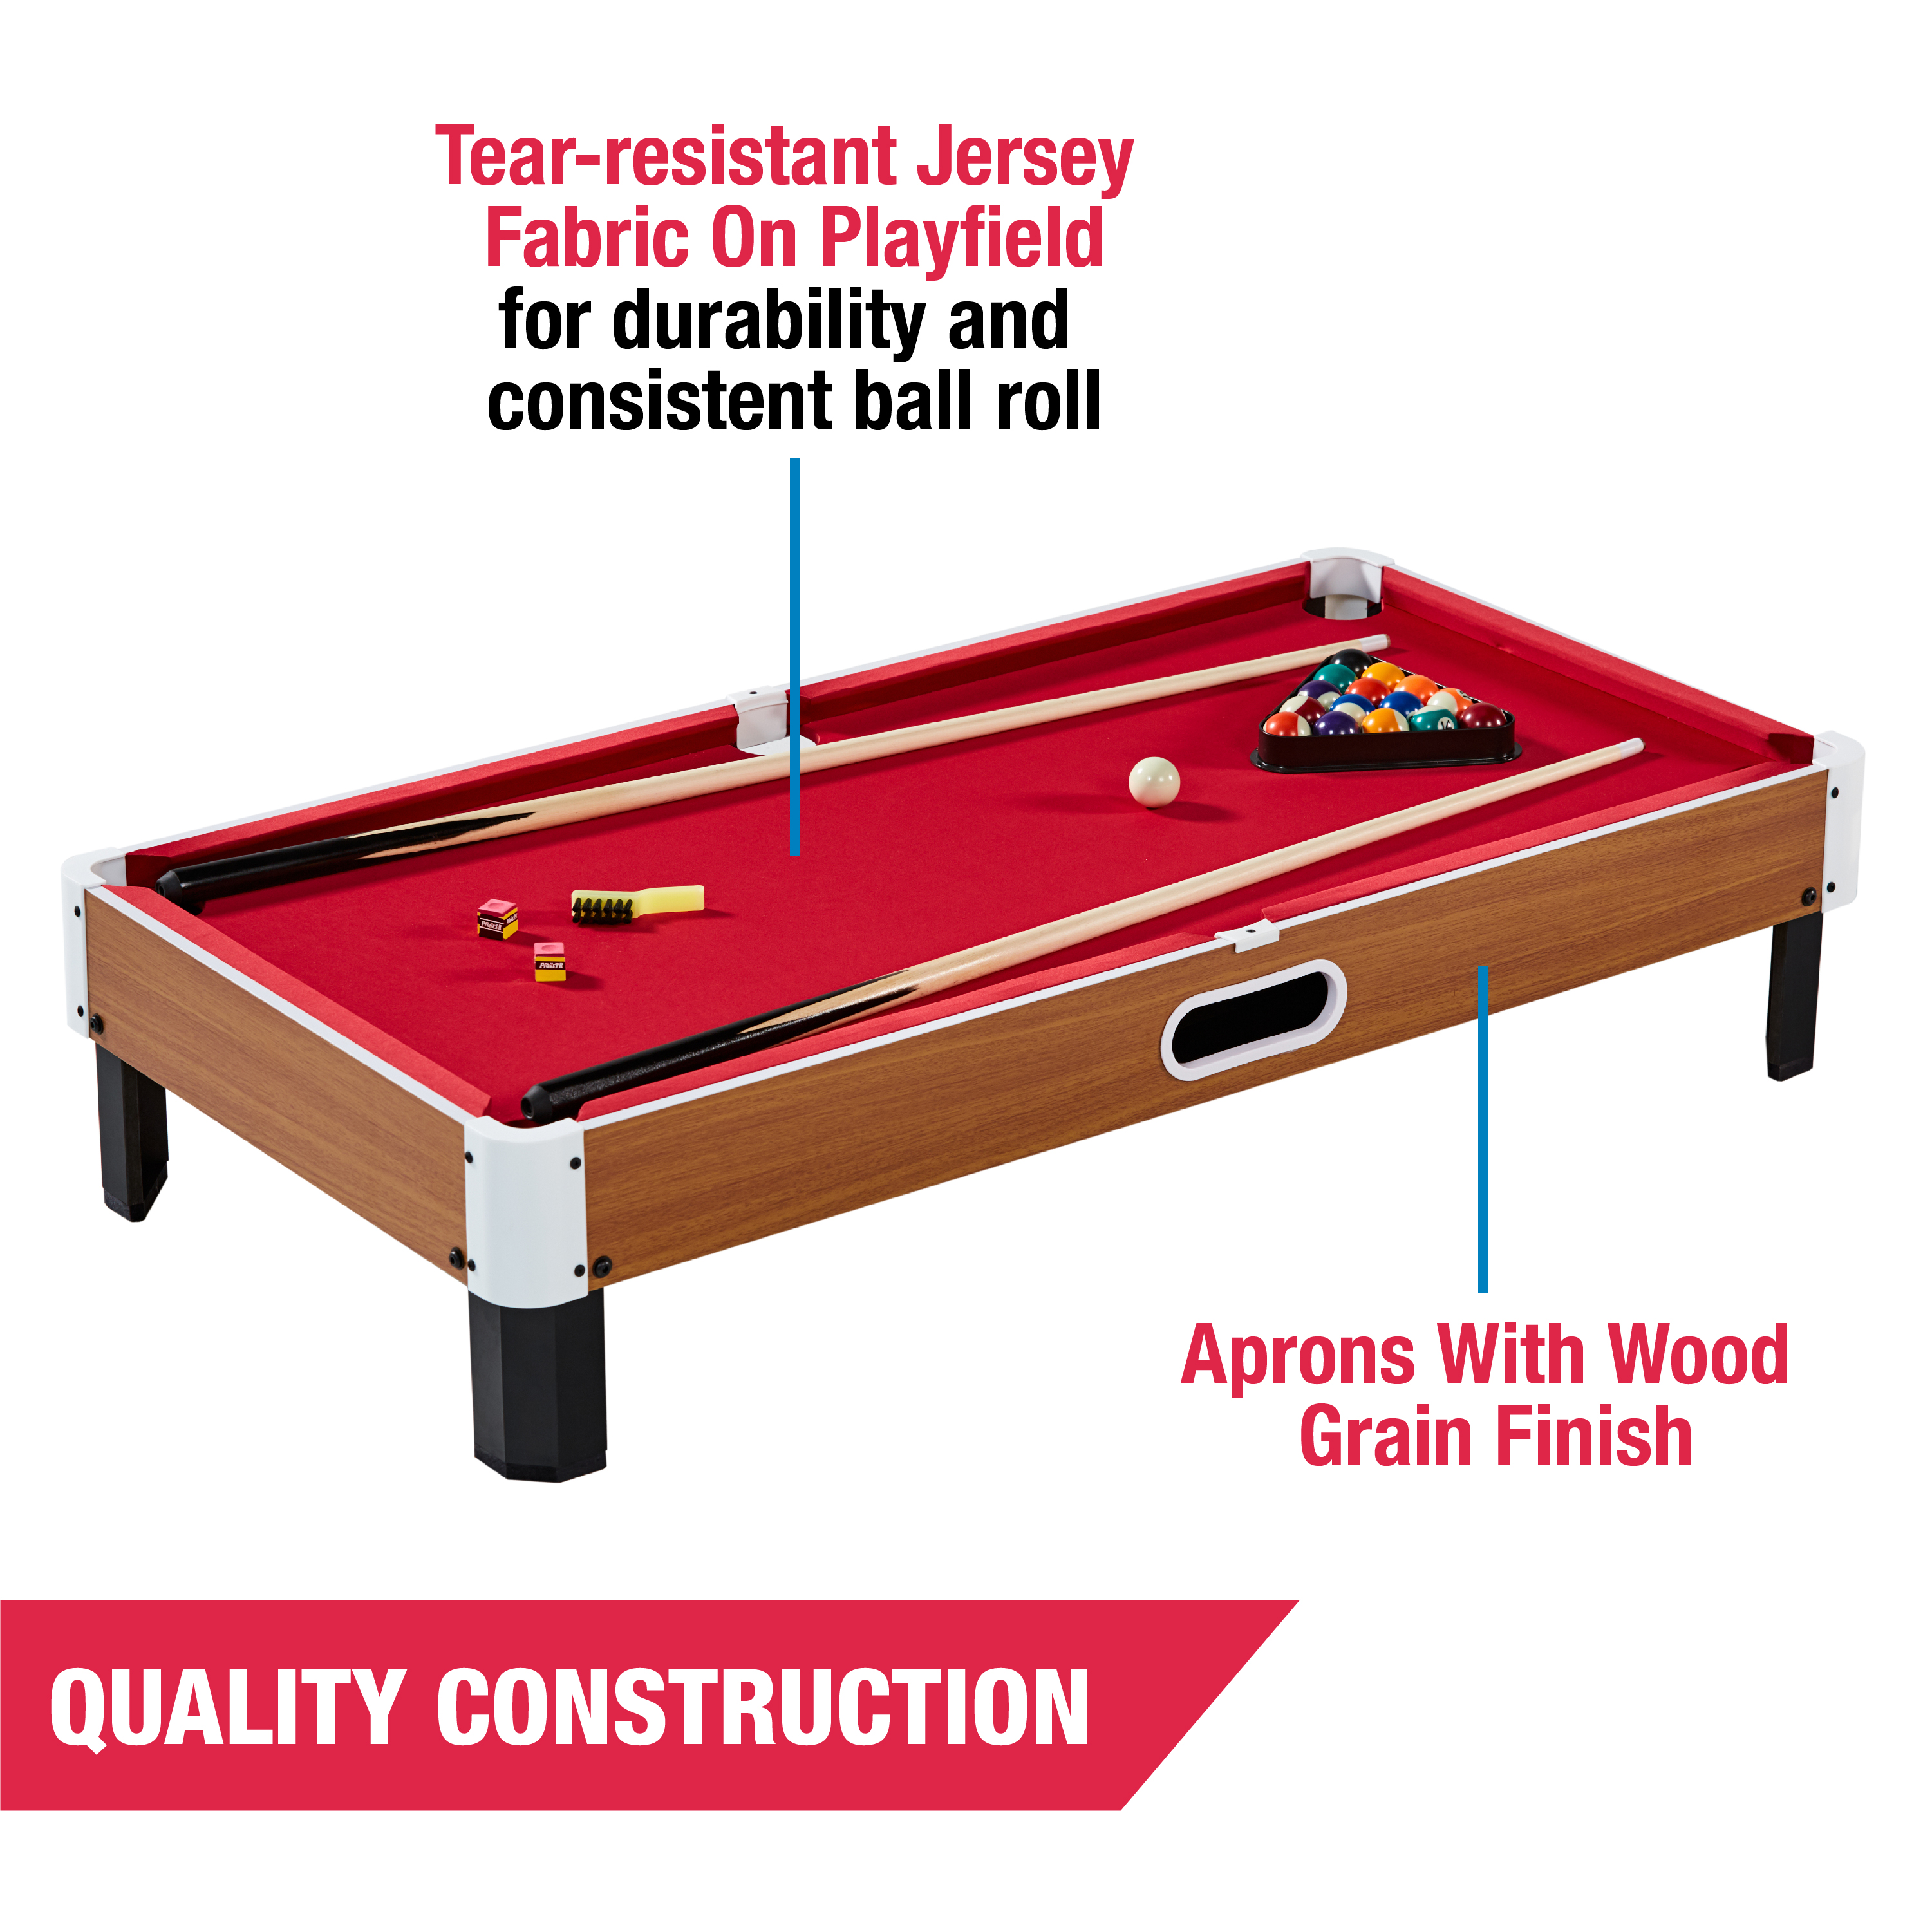 MD Sports Largest 48" Tabletop Billiard Pool Table, Compact Size, Burgundy - image 4 of 11